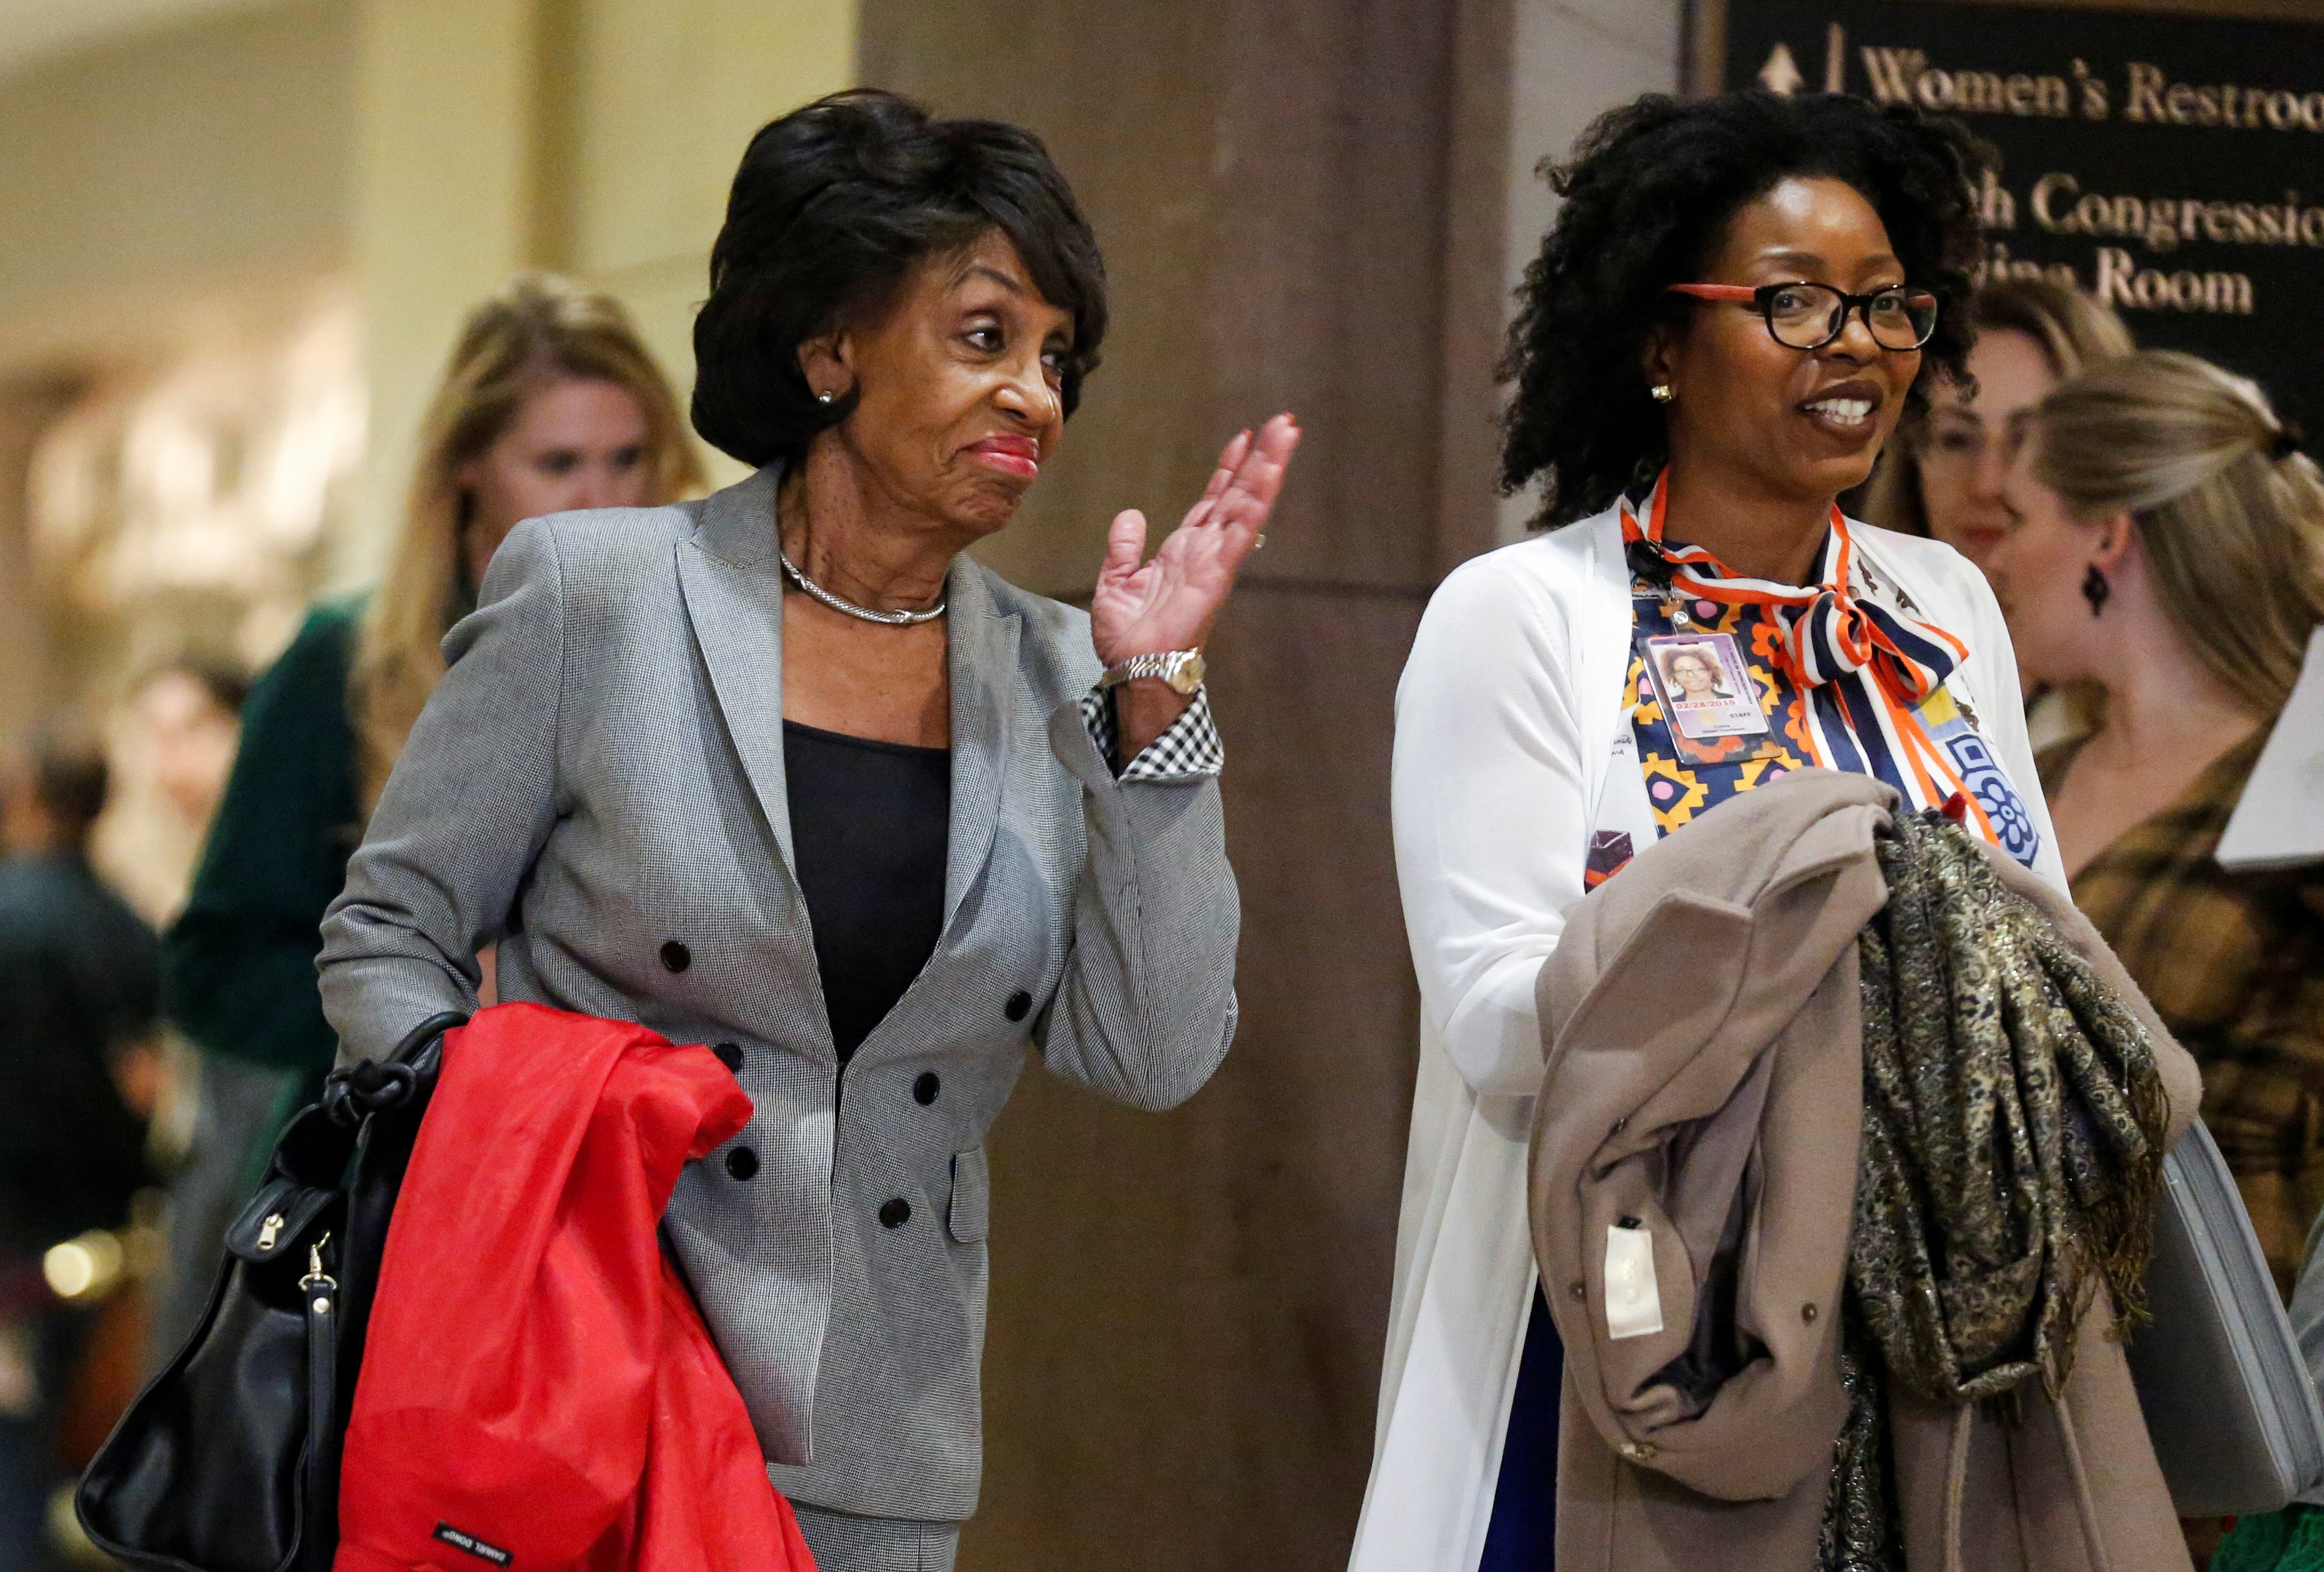 Rep. Maxine Waters (D-CA) arrives for a House Democratic Caucus meeting to choose leaders for the 116th Congress on Capitol Hill in Washington, U.S., November 28, 2018. REUTERS/Joshua Roberts